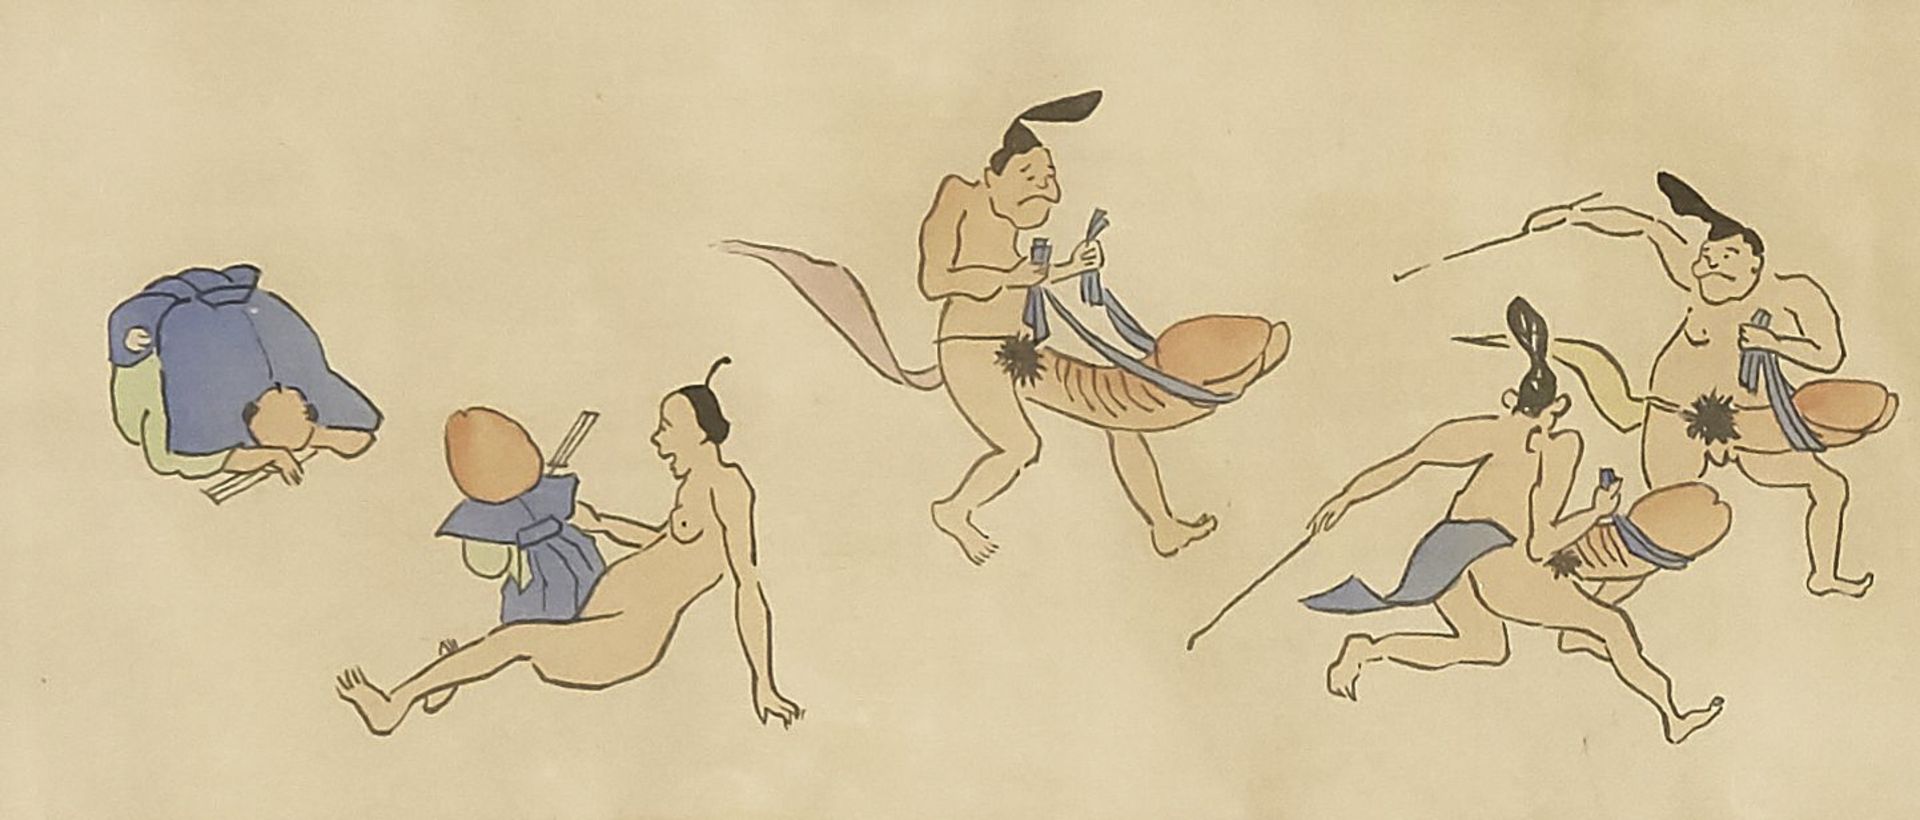 Scroll painting by Gyu Sai Kawanabe, Mocking the Strength of Man, Japan, 17th century, painting on - Image 4 of 6